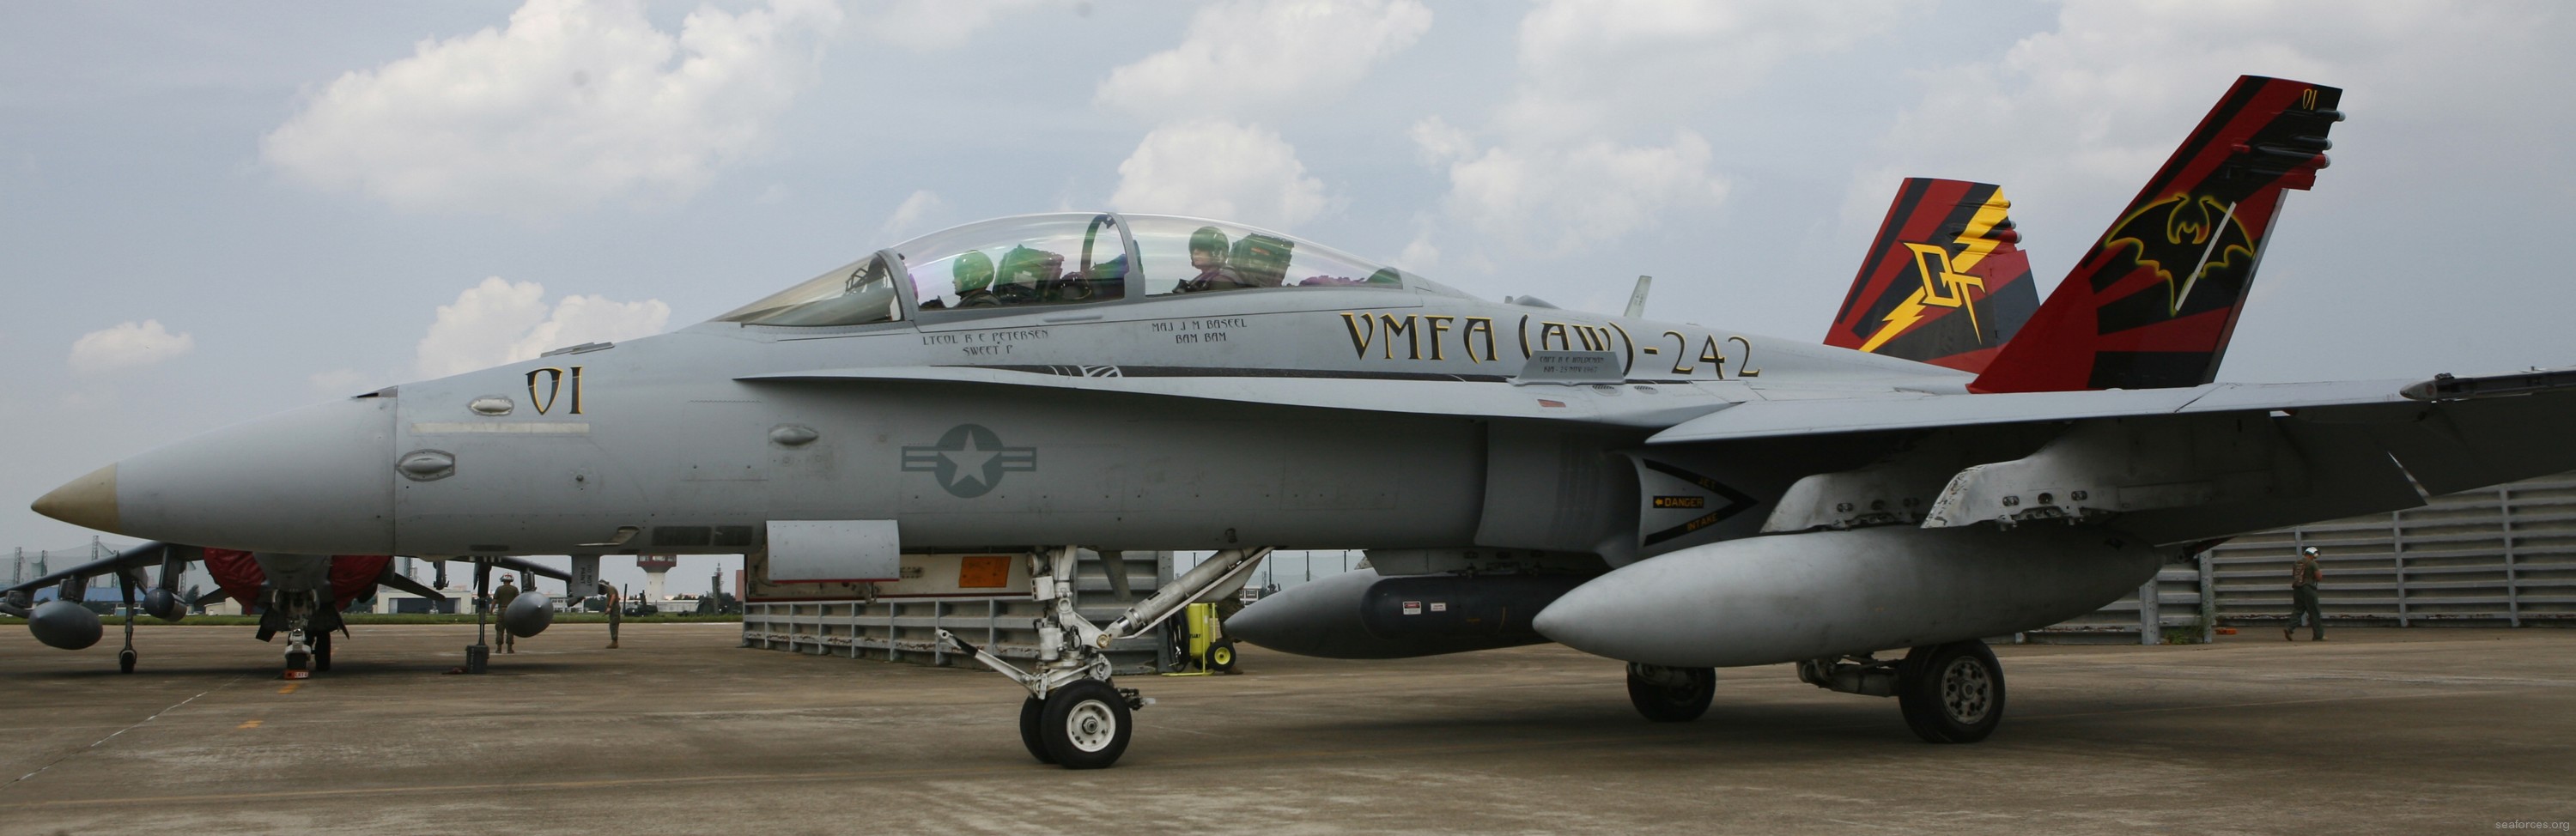 vmfa(aw)-242 bats marine all-weather fighter attack squadron usmc f/a-18d hornet 12